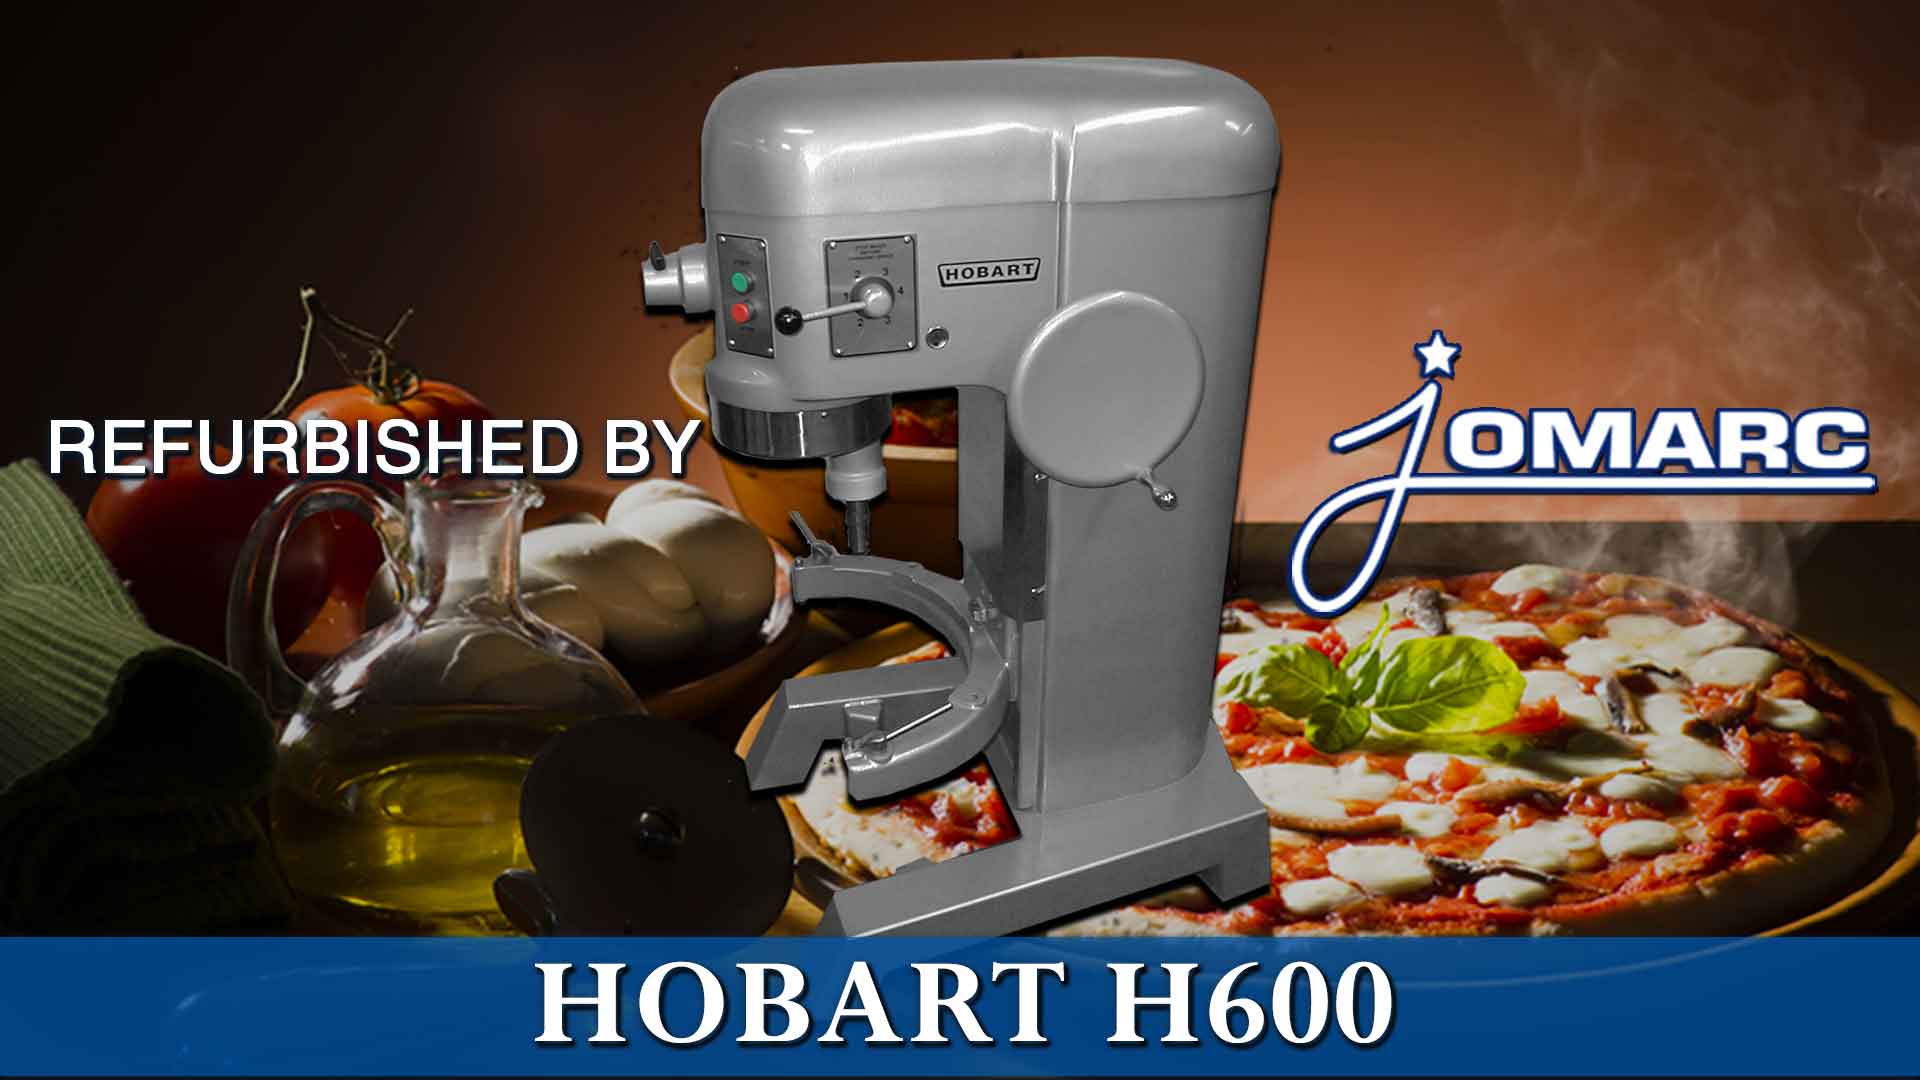 Hobart Mixer D300 30-quart Refurbished by Jomarc Emergency Commercial Food Service Equipment for Absecon, Northfield , Ocean City New Jersey 08201. We guarantee our work, warranty, freight shipping to all 50 states, Canada, Paris France